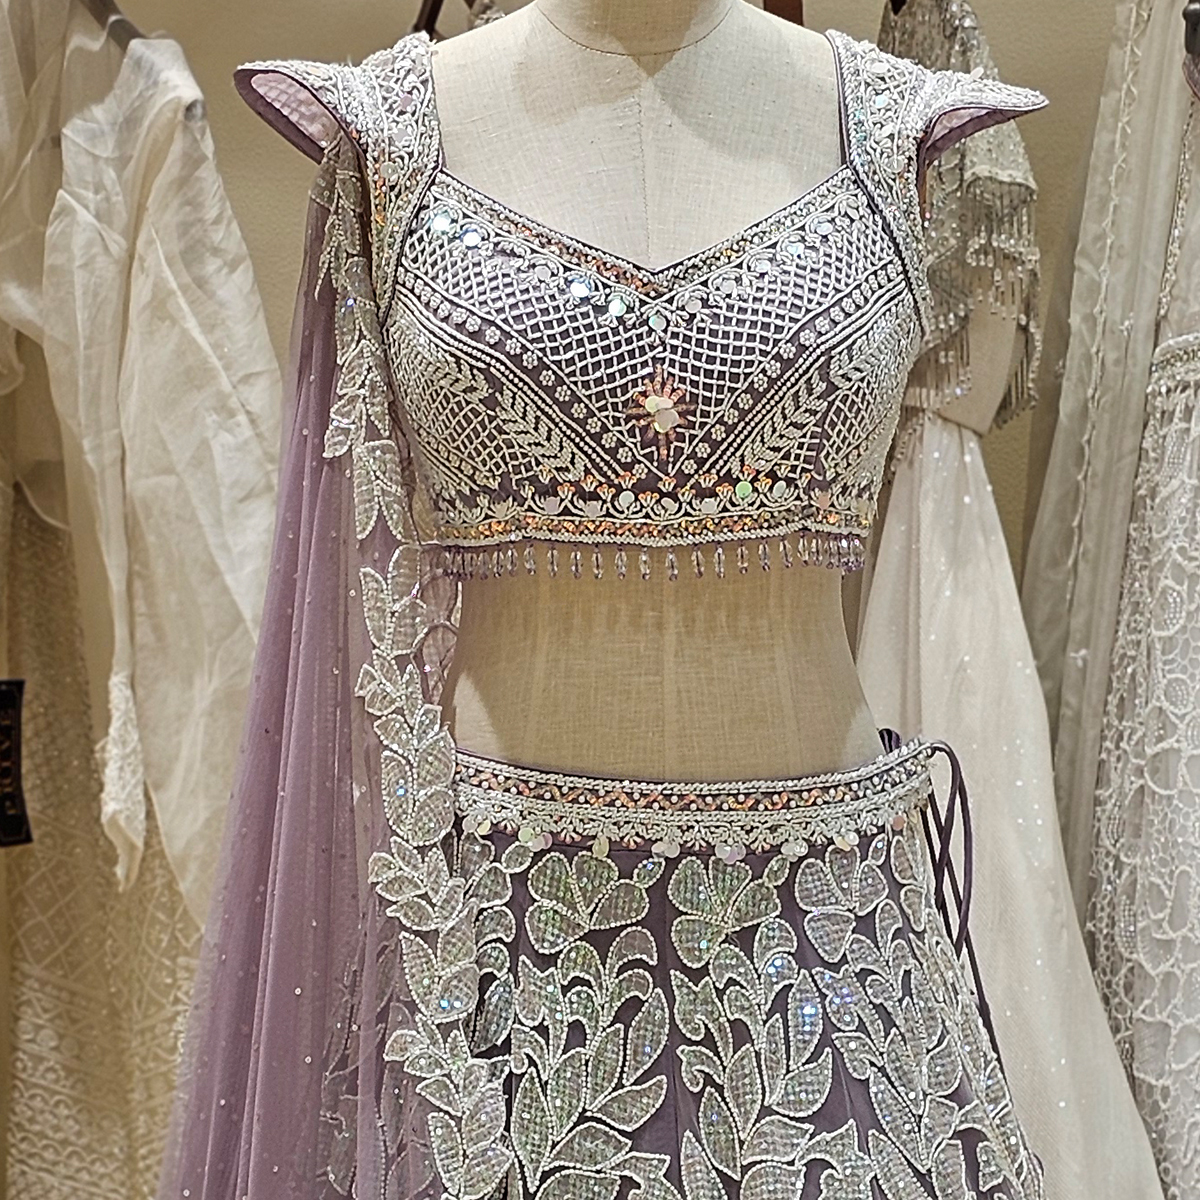 Stone Symphony🌟  Awash in a light purple haze, this lehenga shimmers with stonework, whispering tales of enchantment✨  Make your next event unforgettable. Shop Now! 💫  #neerusindia #neerus #neerusfashion #newcollection #ethnicwear  #lehengas #bridal #gowns #sarees #fusion